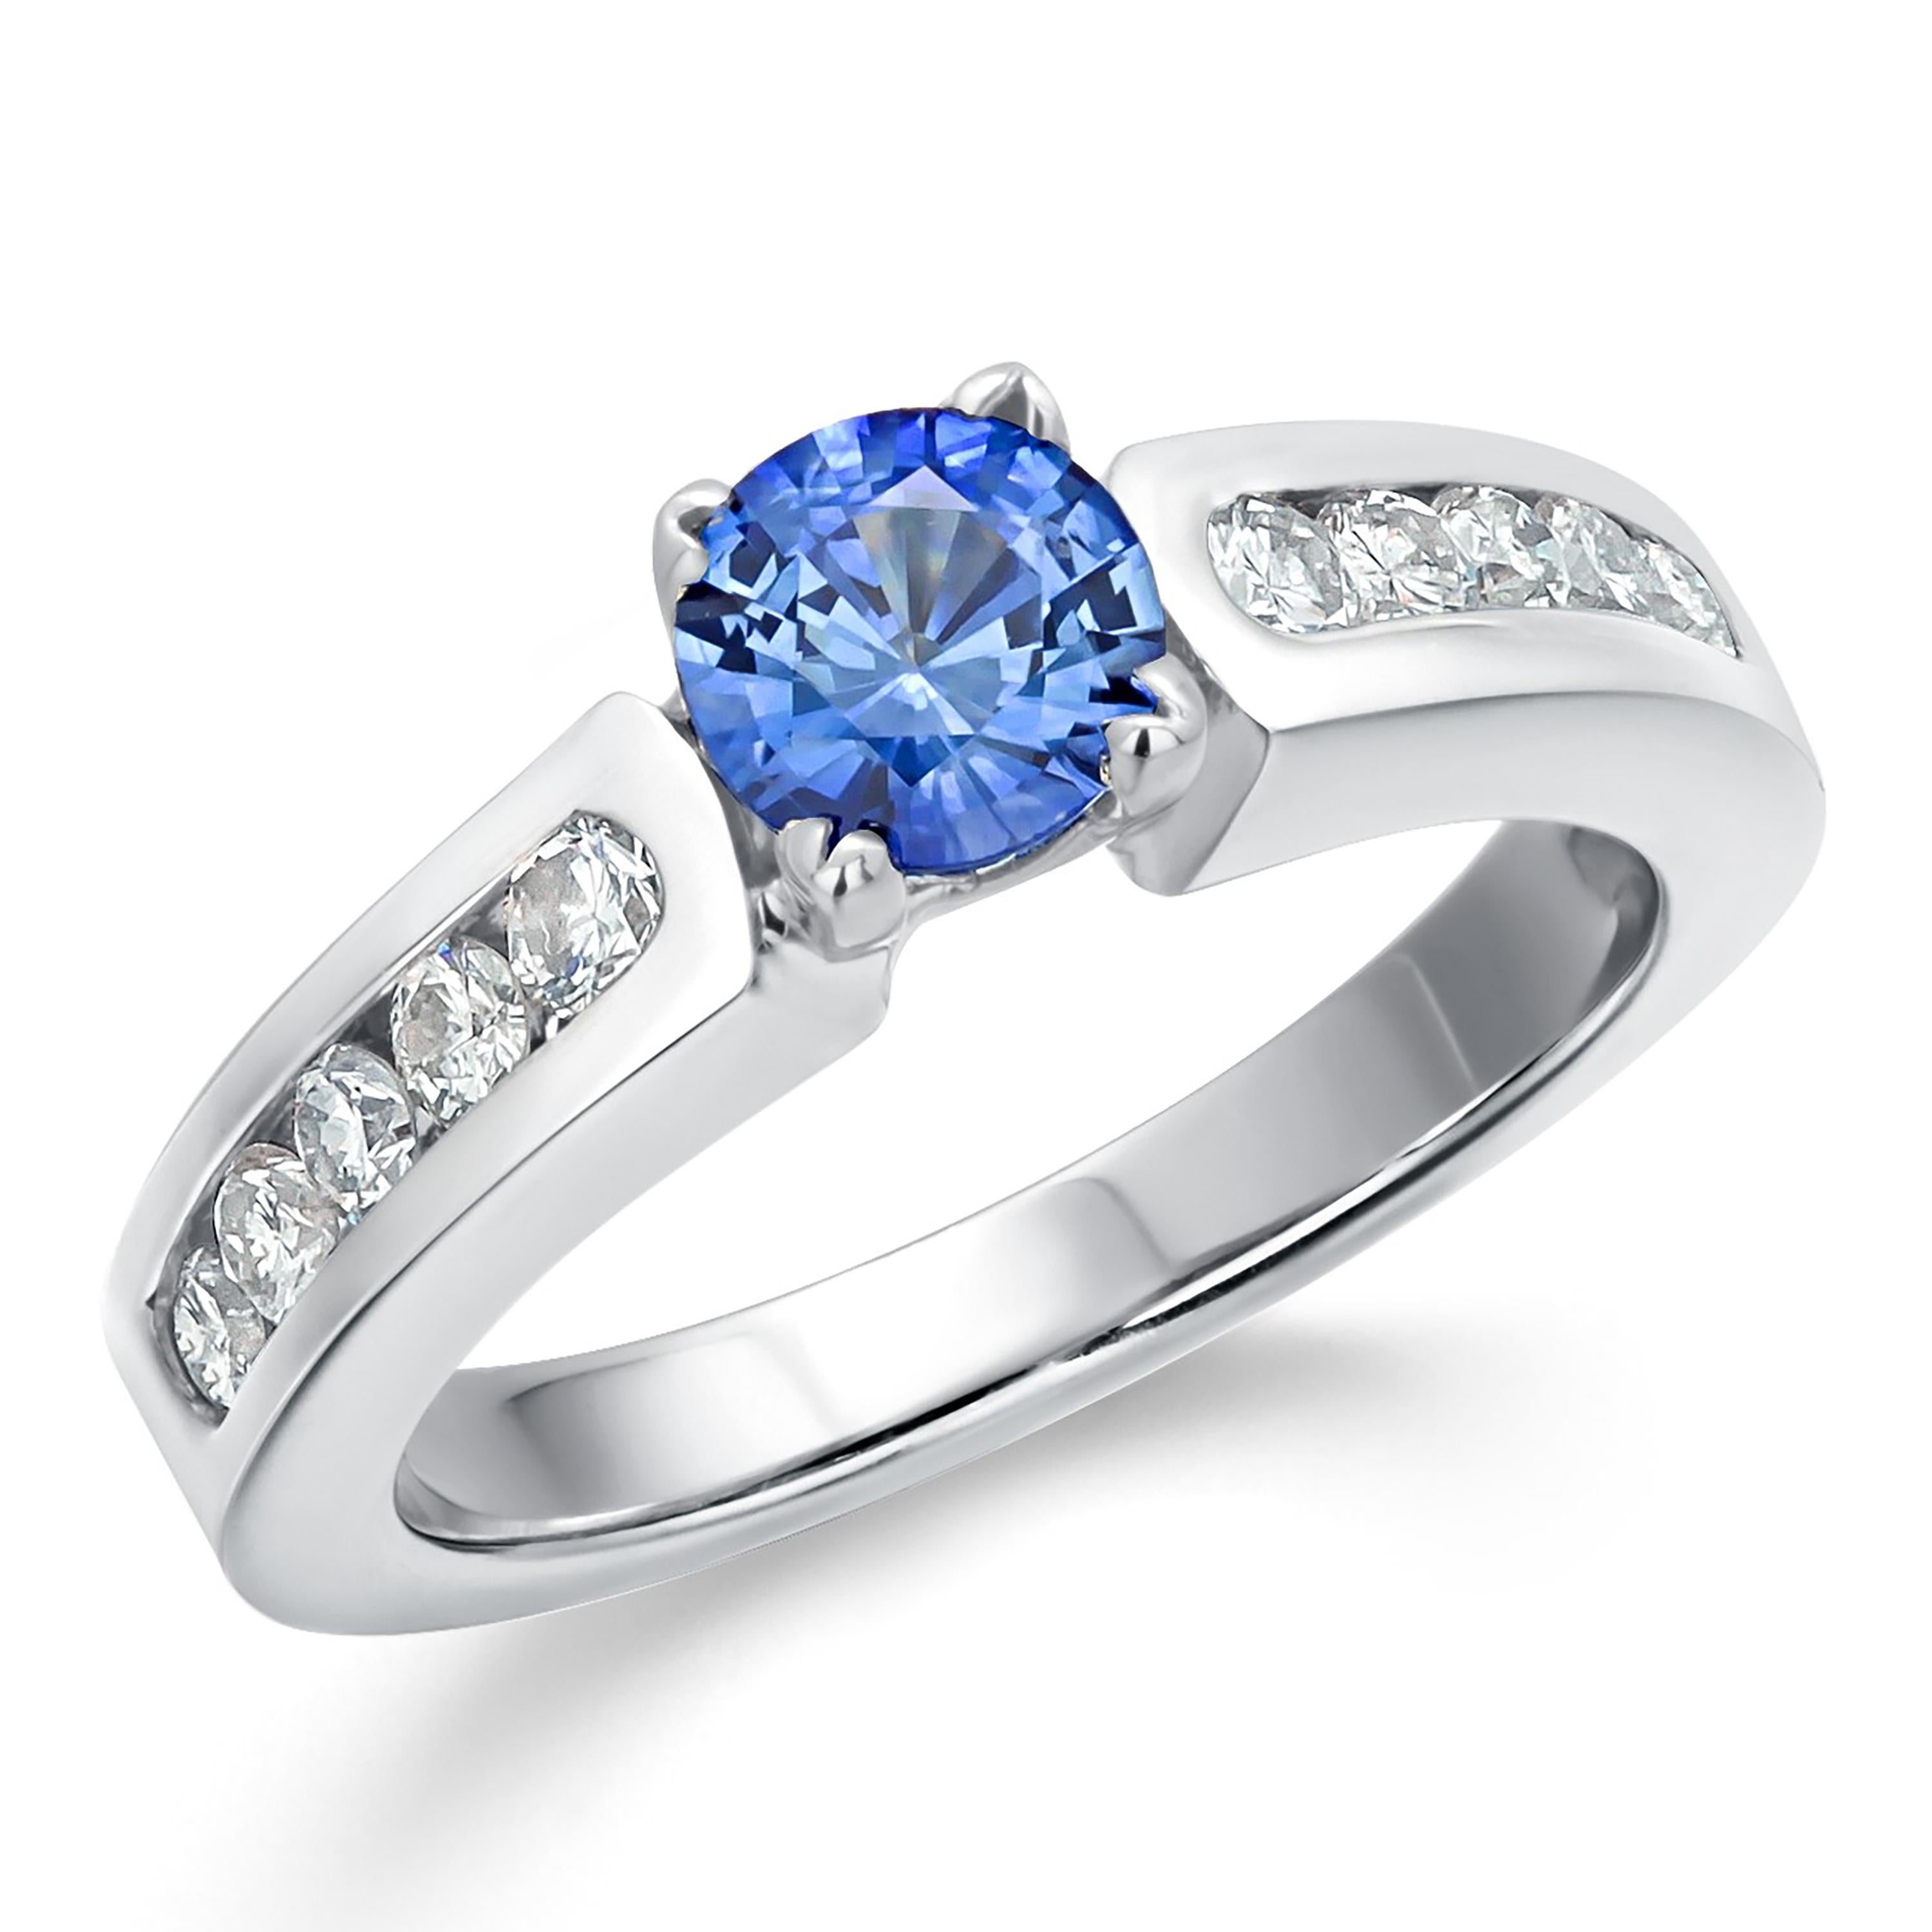 Ceylon Sapphire Diamond 0.90 Carat 14 Karat White Gold Engagement Ring Size 5.5 In New Condition For Sale In New York, NY